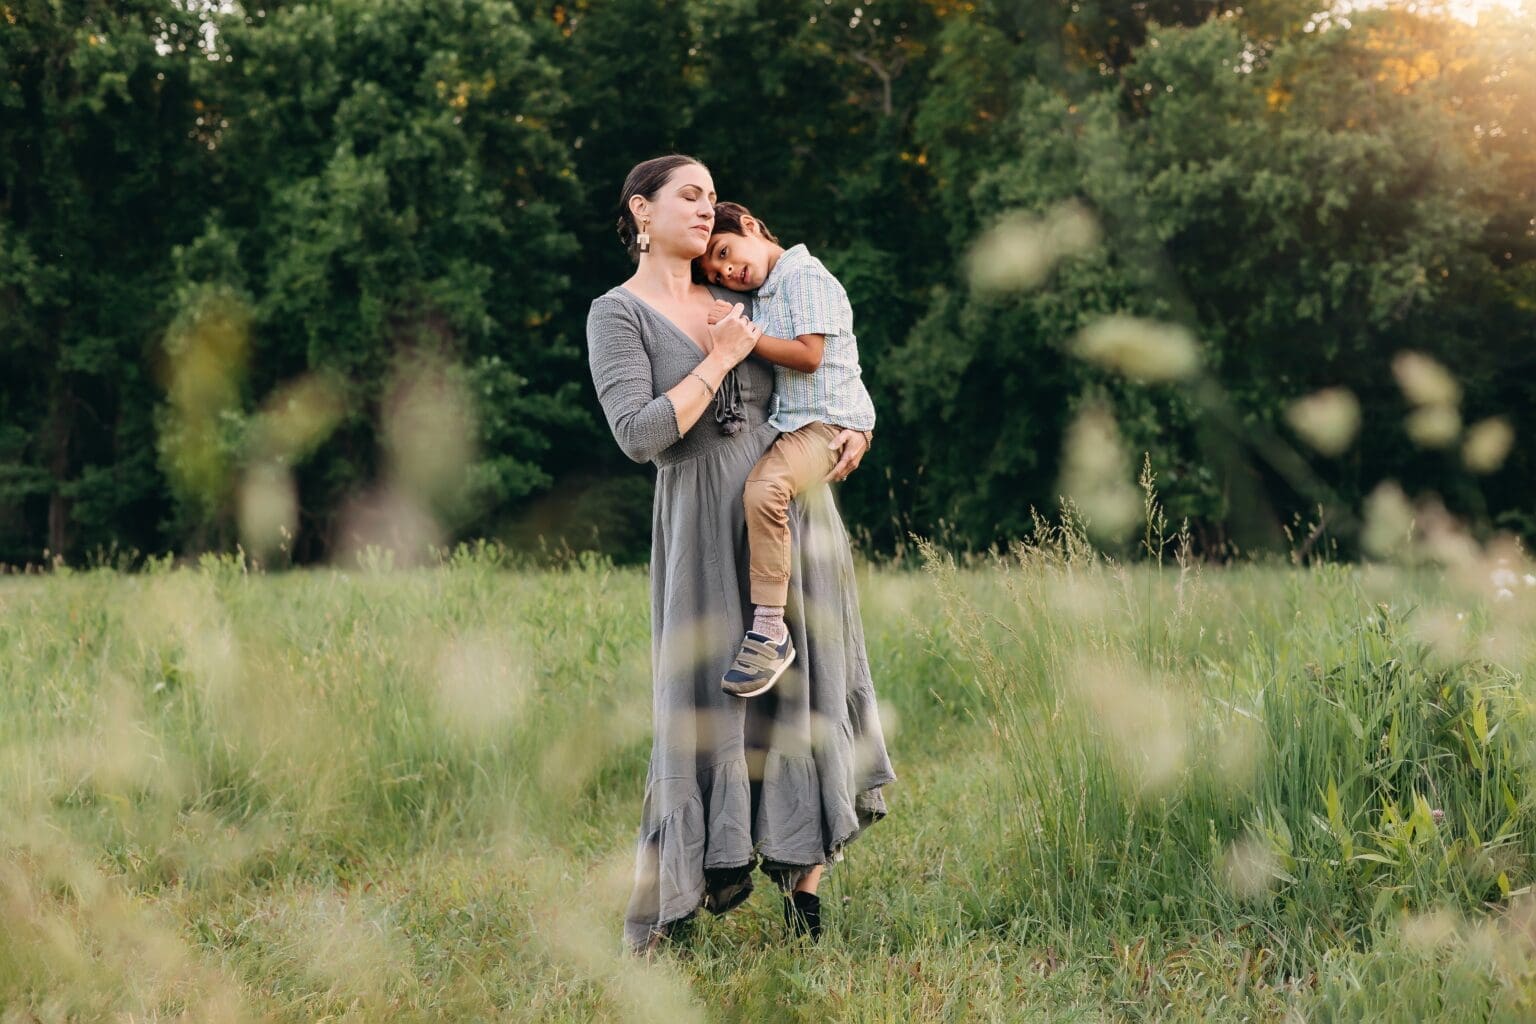 Mom holds her son as he rest his head on her shoulder in a lush green field.